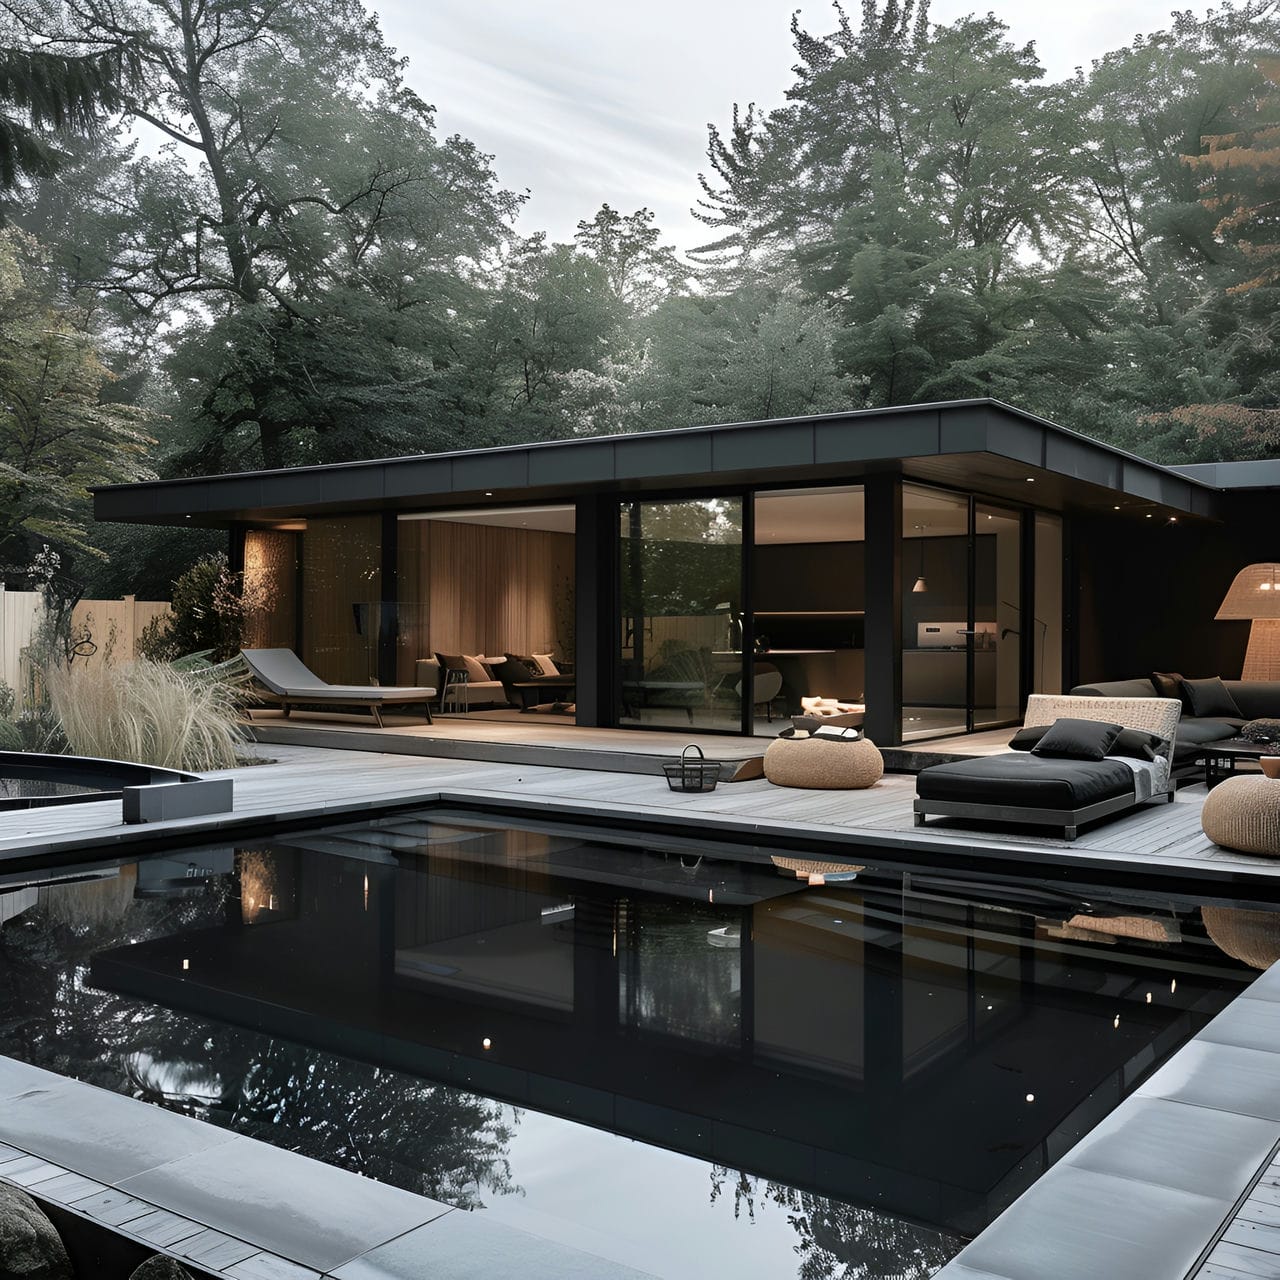 Pool house: size, functionality, uses, furniture and renovation